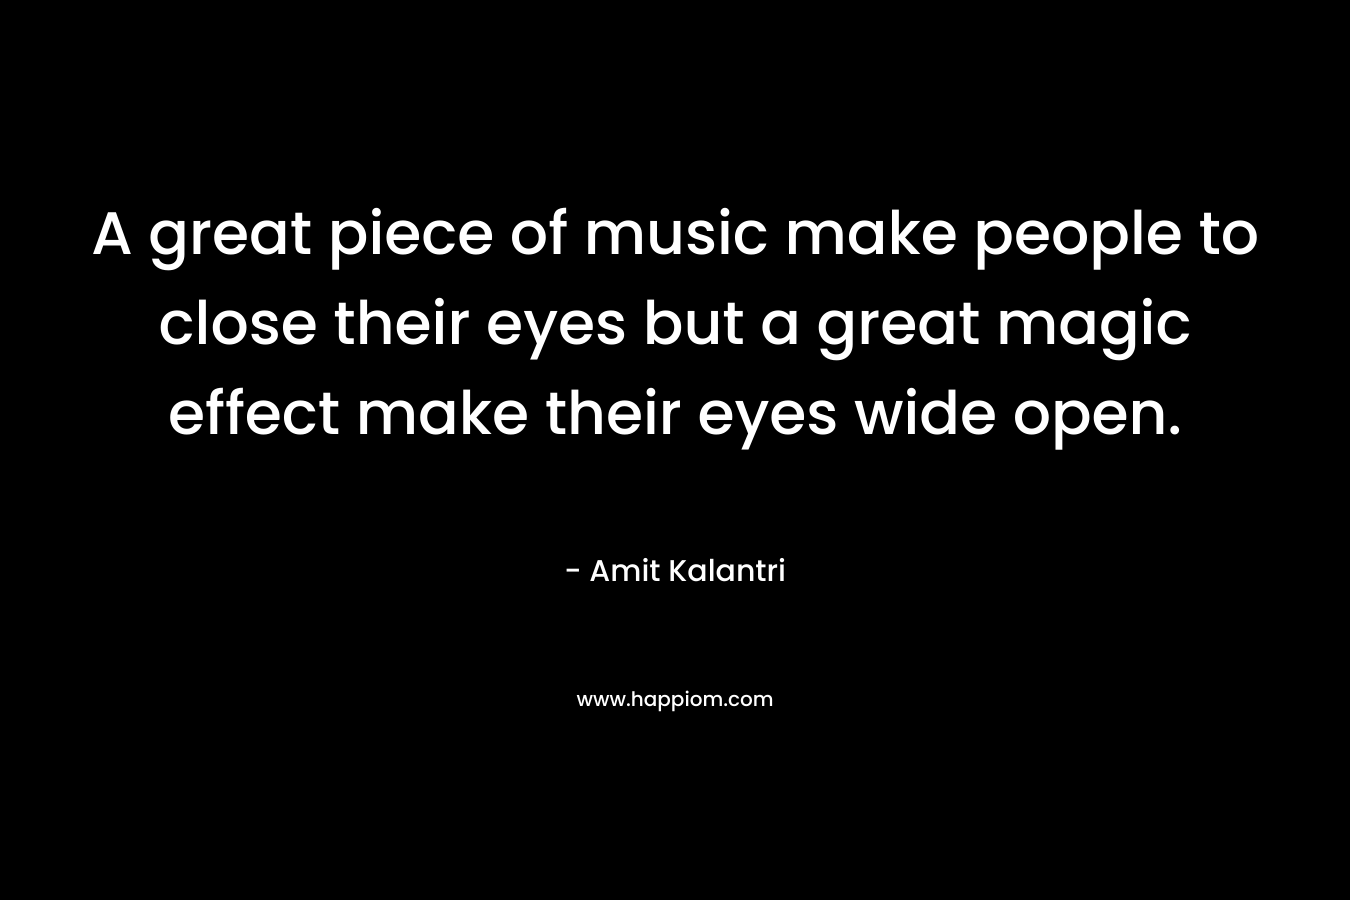 A great piece of music make people to close their eyes but a great magic effect make their eyes wide open.